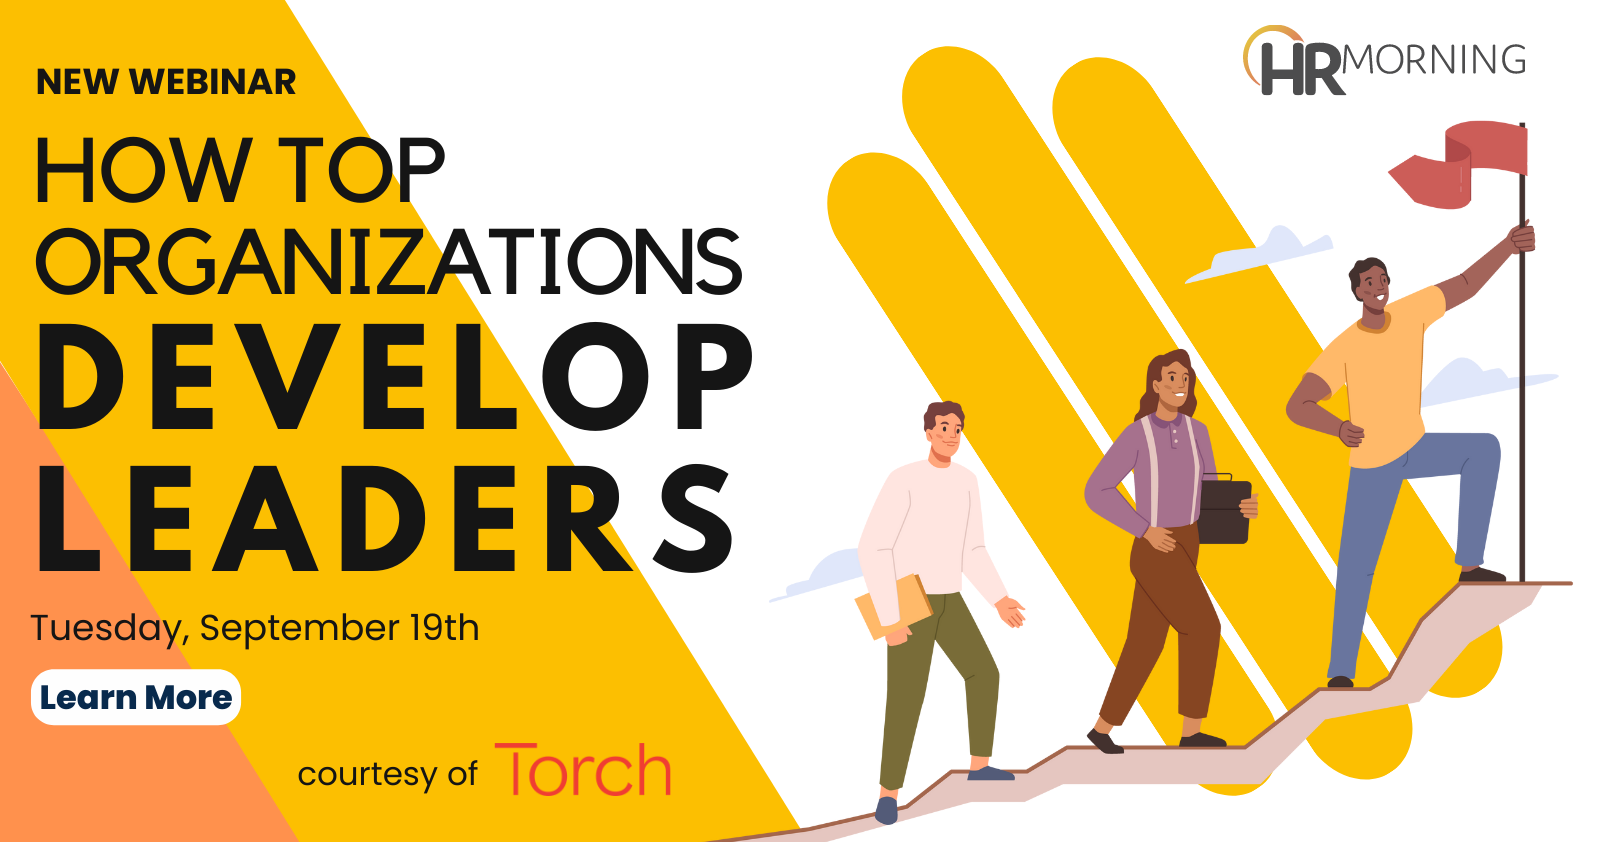 Tuesday, September 19th, 2023 How Top Organizations Develop Leaders